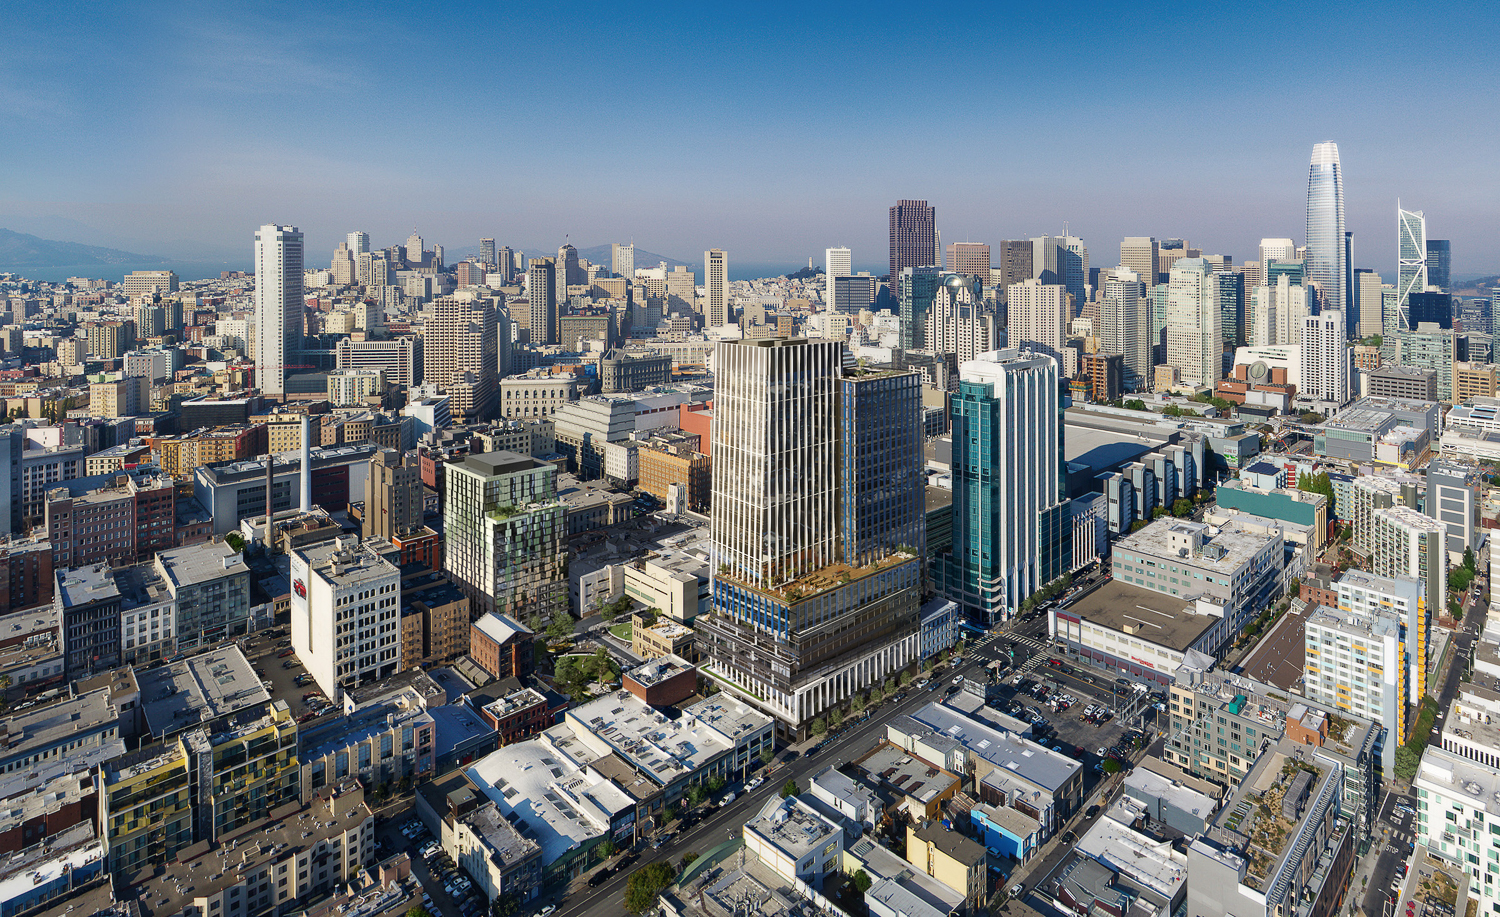 5M over-view, rendering by Steelblue courtesy Brookfield Properties